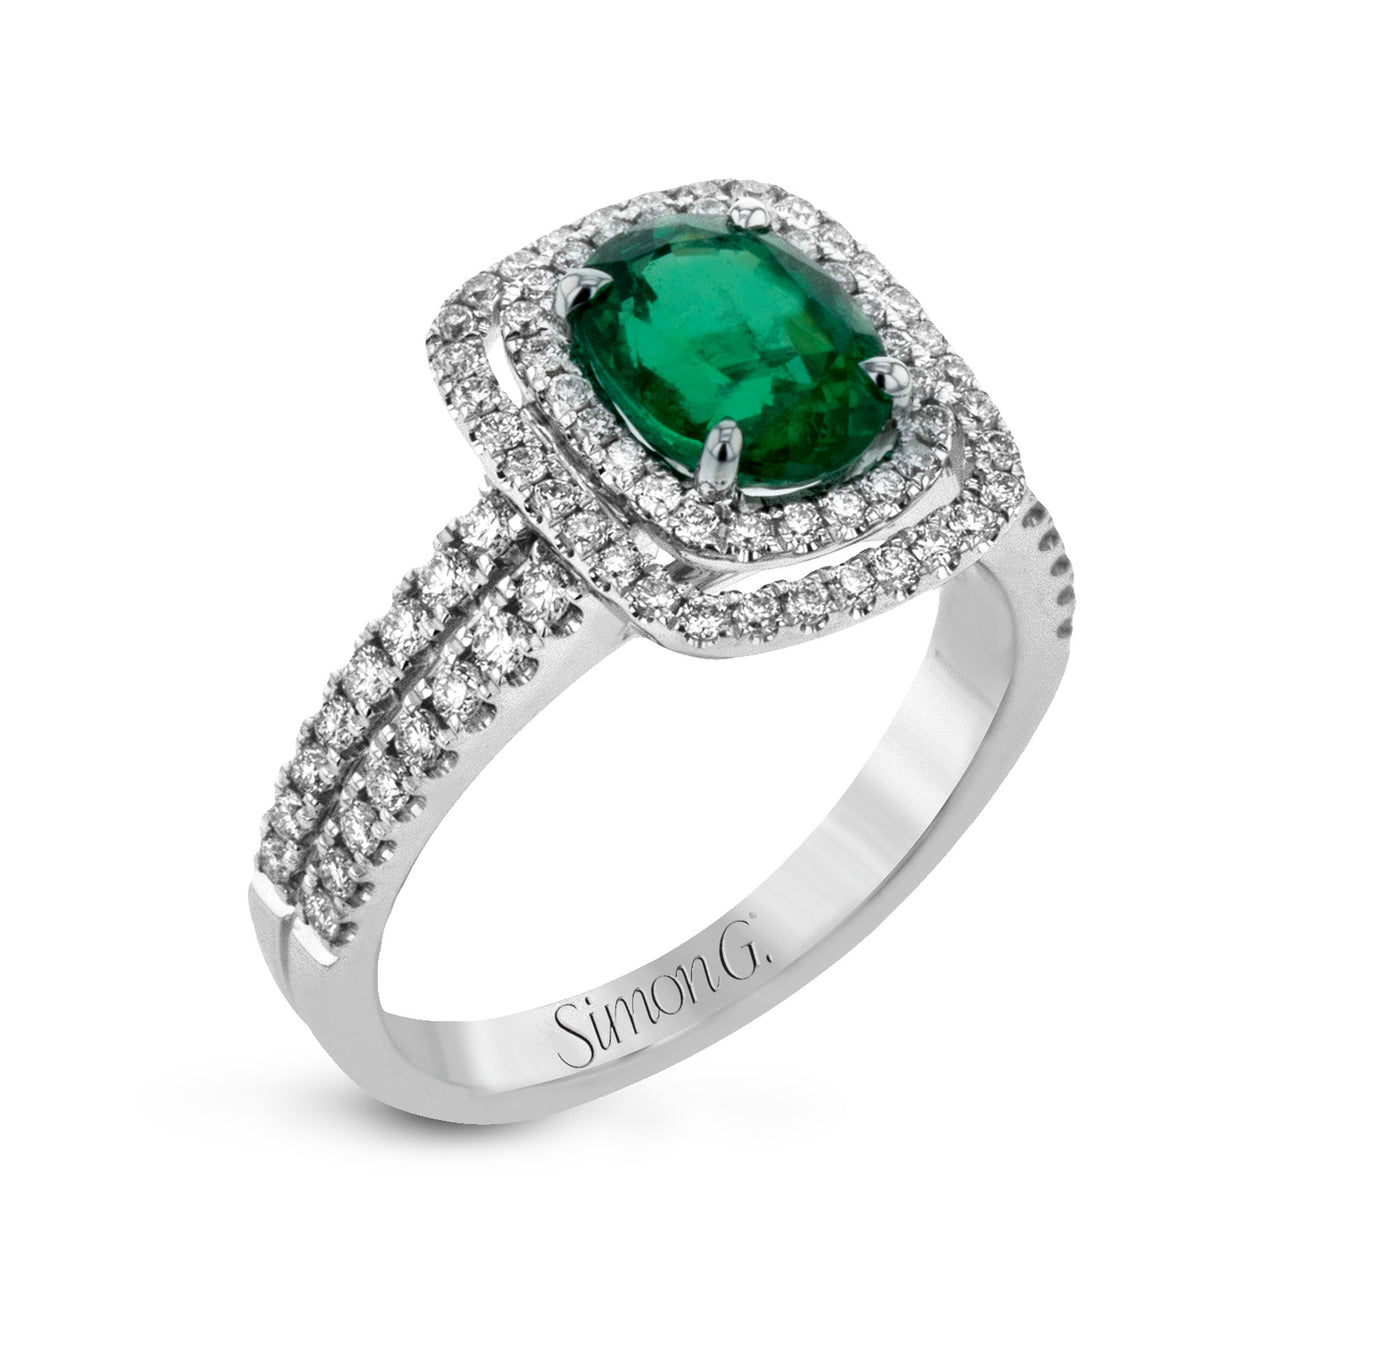 Simon G MR1920-A Emerald and Diamond Ring in White Gold